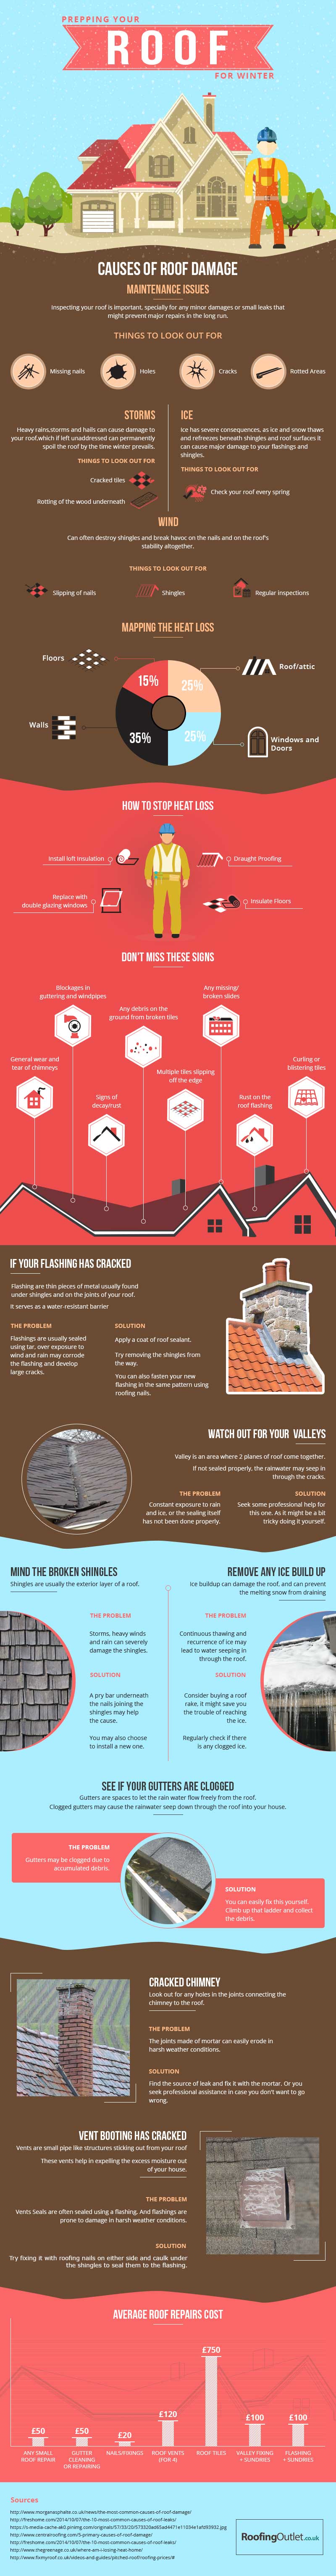 Prepping your roof infographic